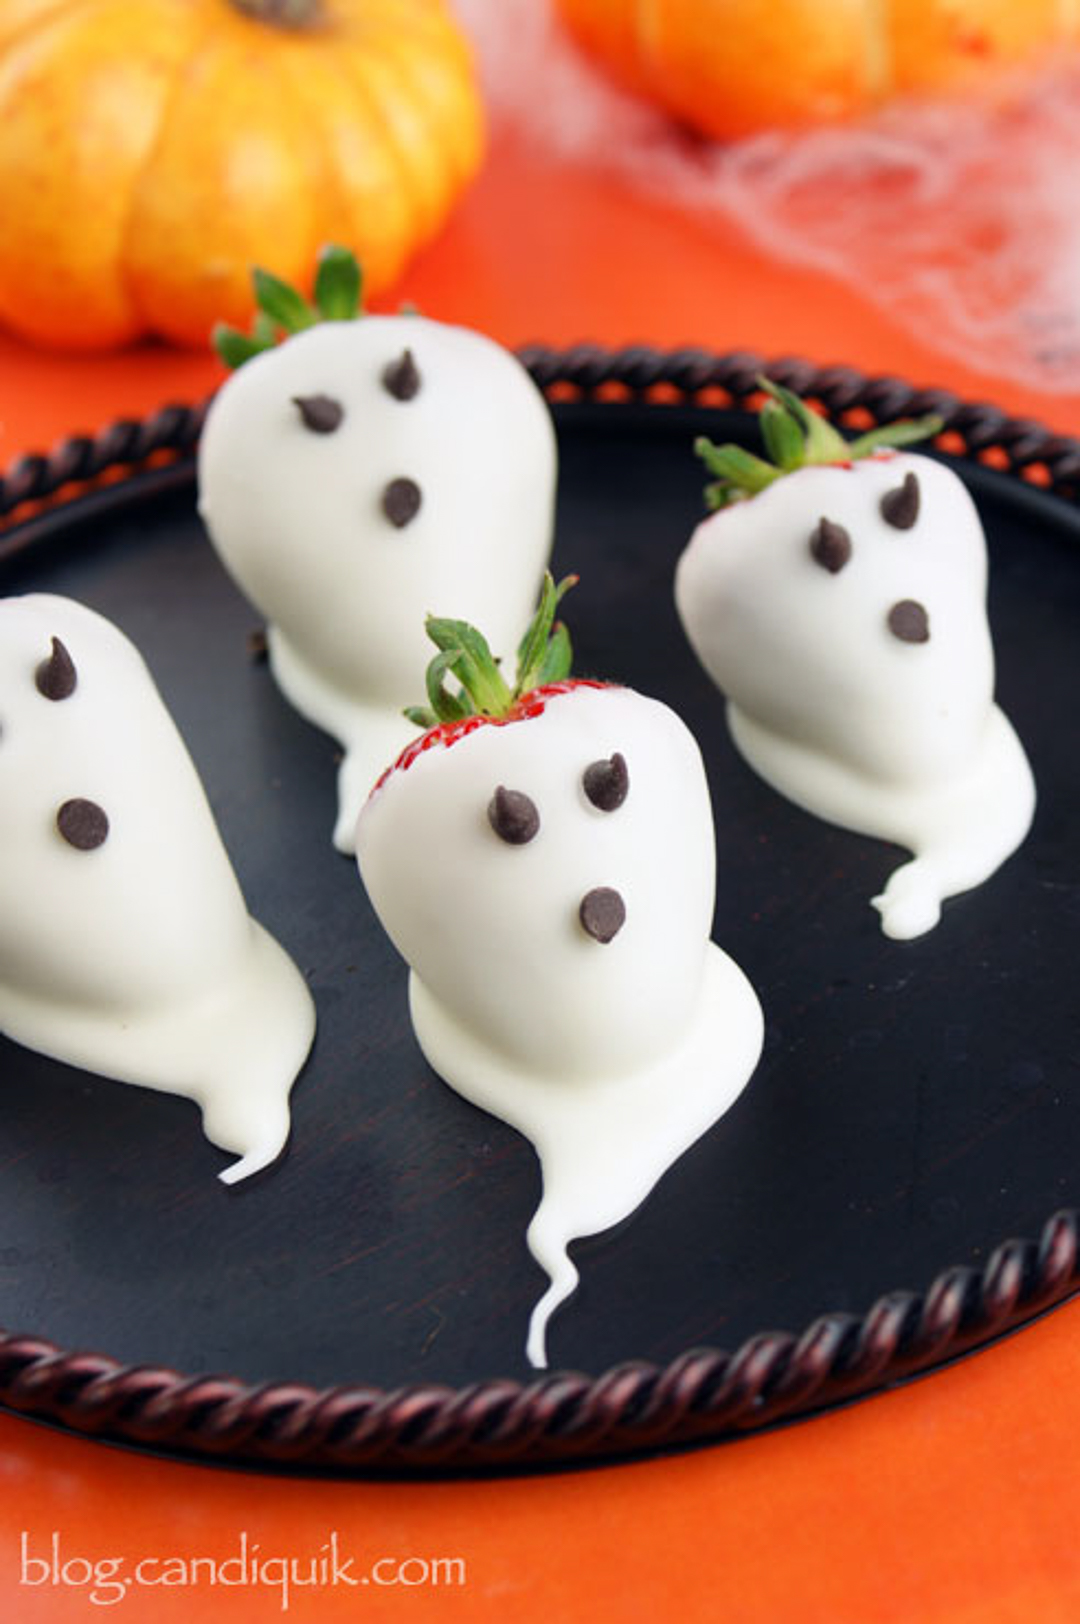 White chocolate covered strawberry ghosts.